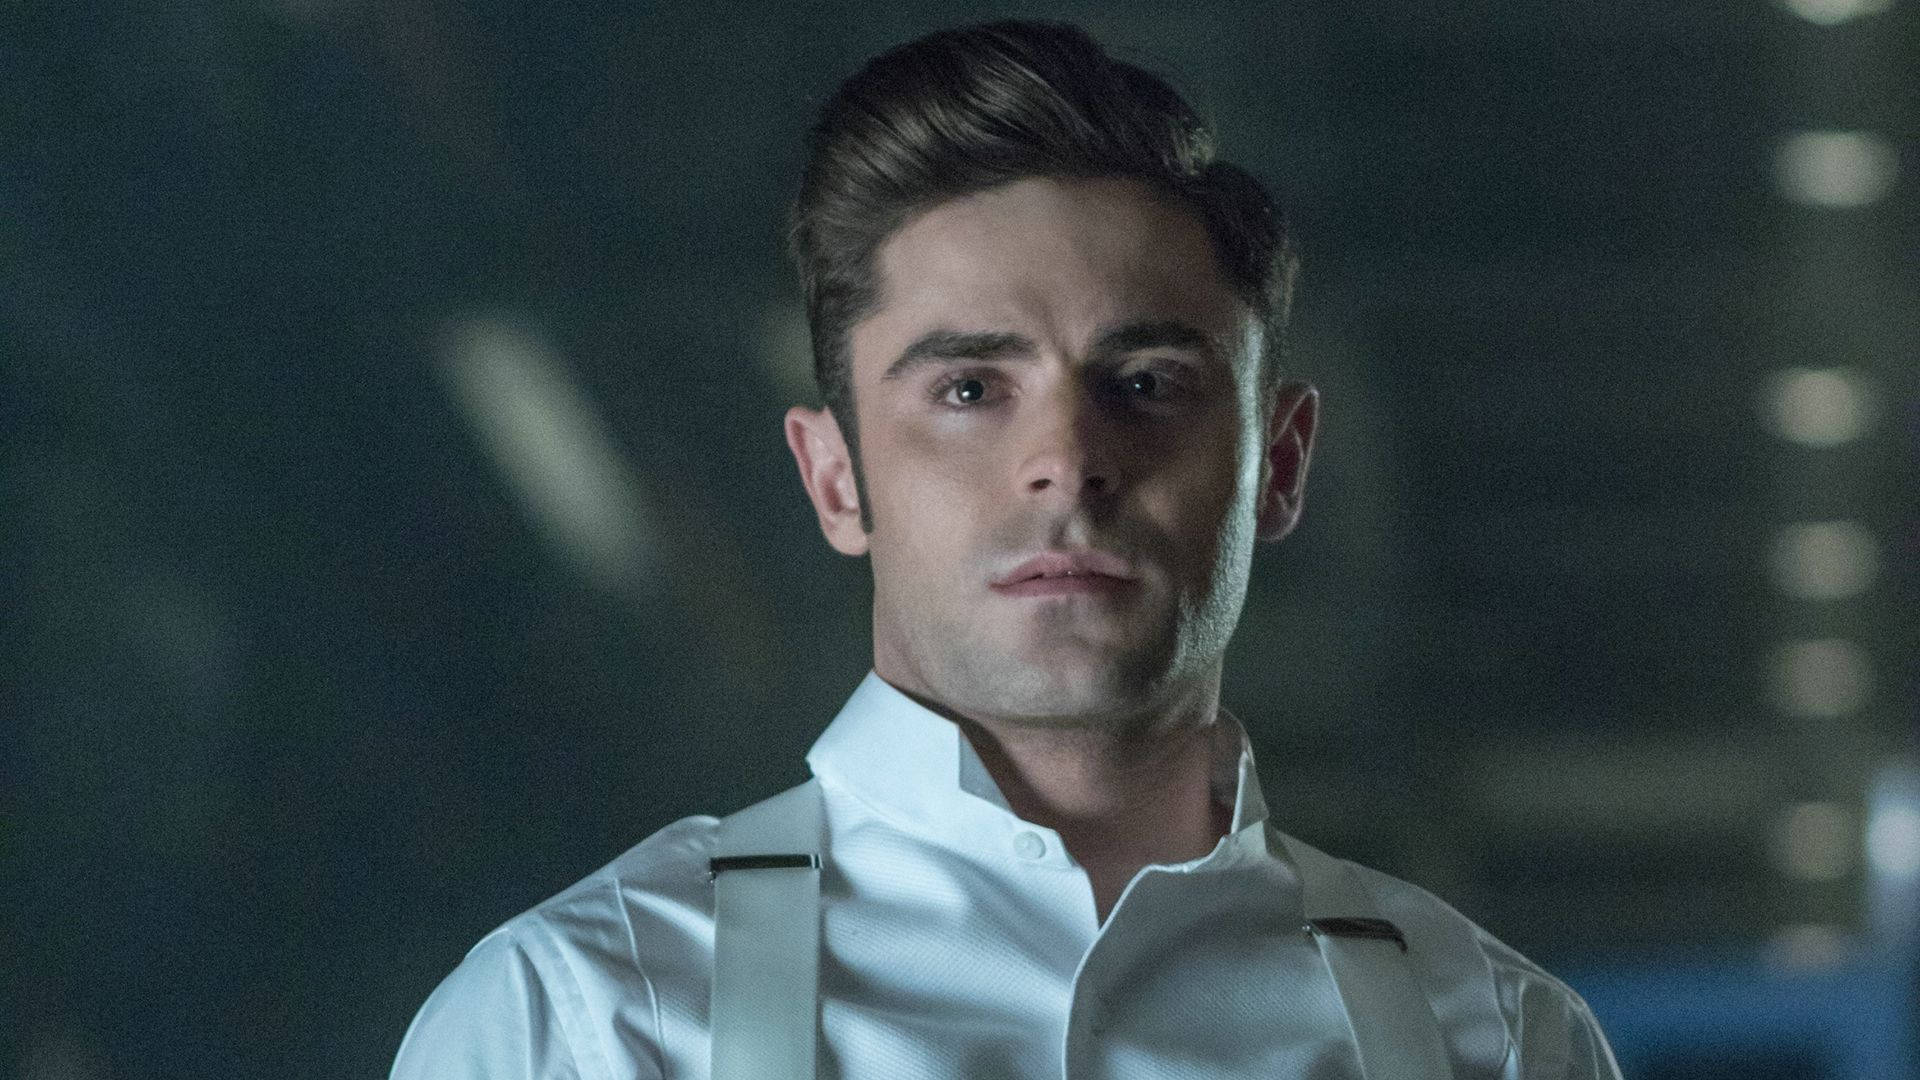 Zacefron In The Greatest Showman Wallpaper